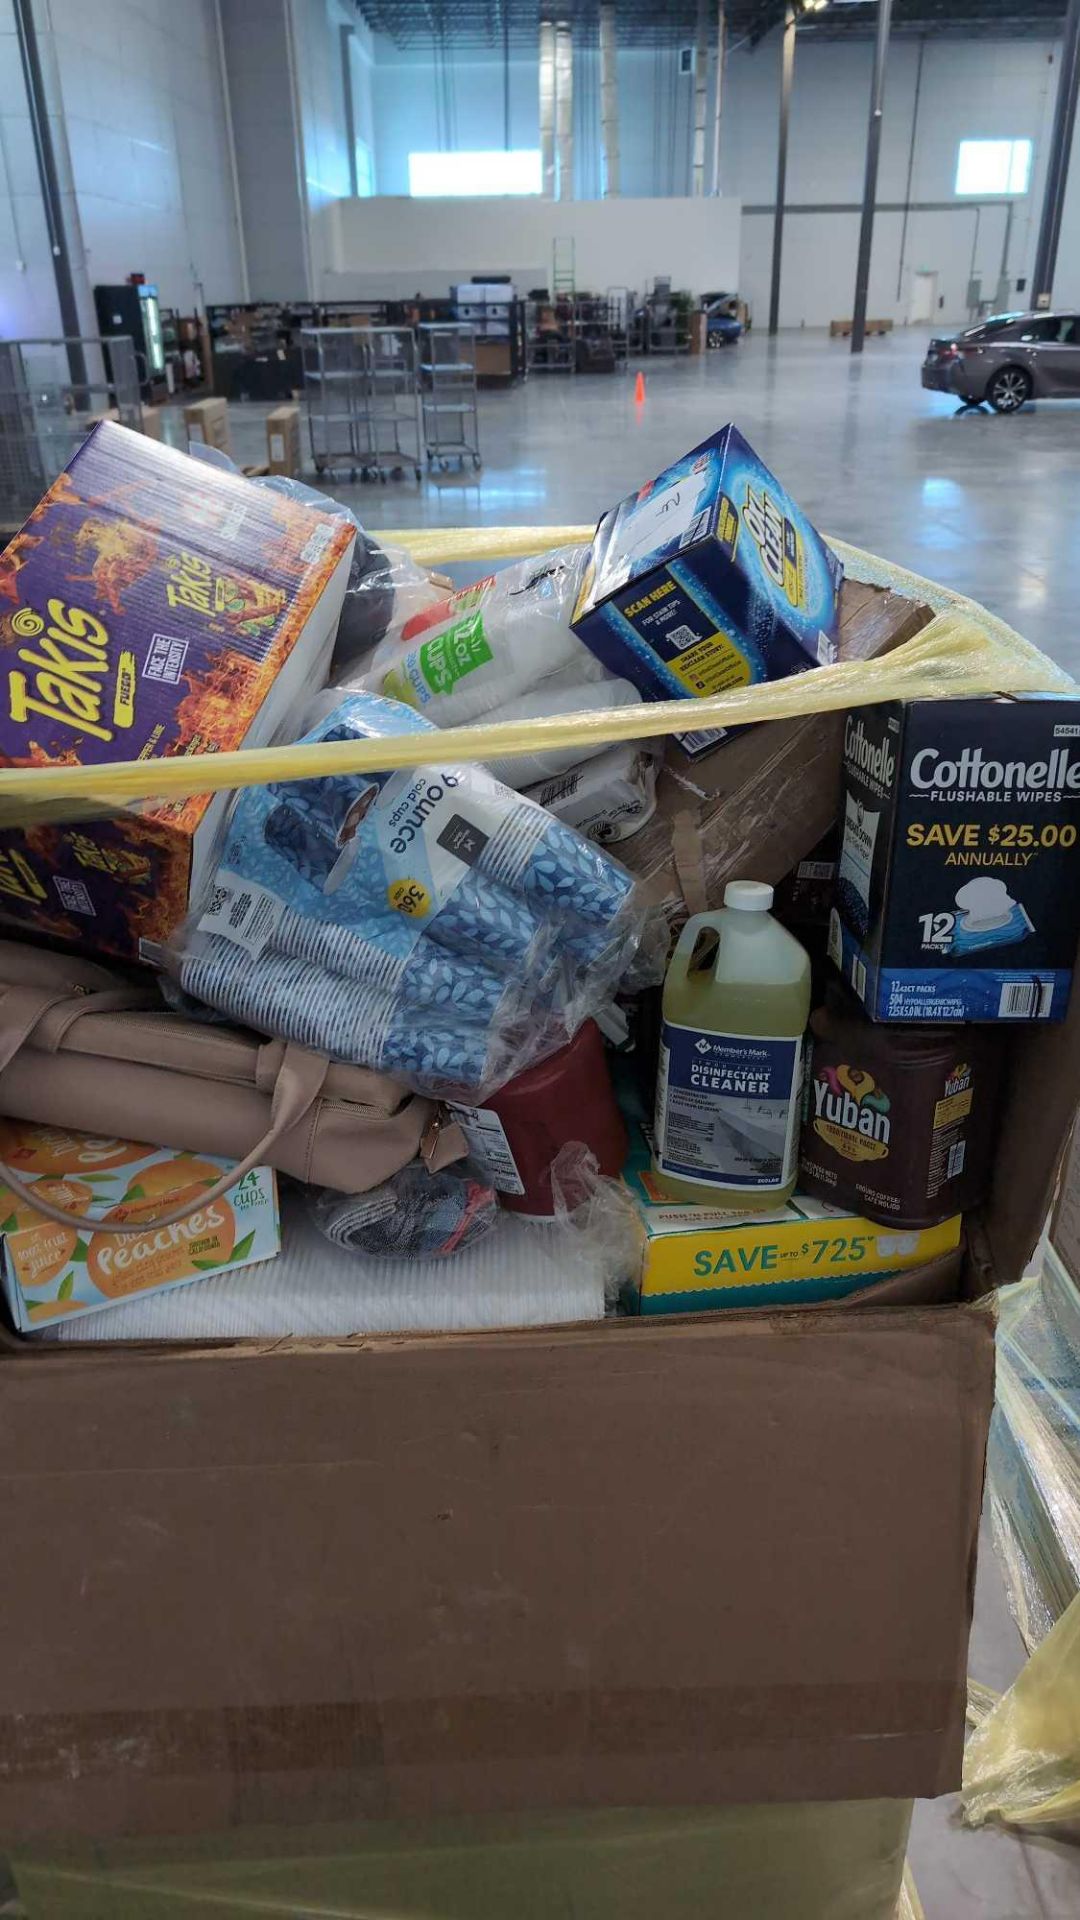 Big box store in a box: Folgers, Always wings, cups, downy, soap, wipes, yuban Coffee, pampers, ketc - Image 5 of 5